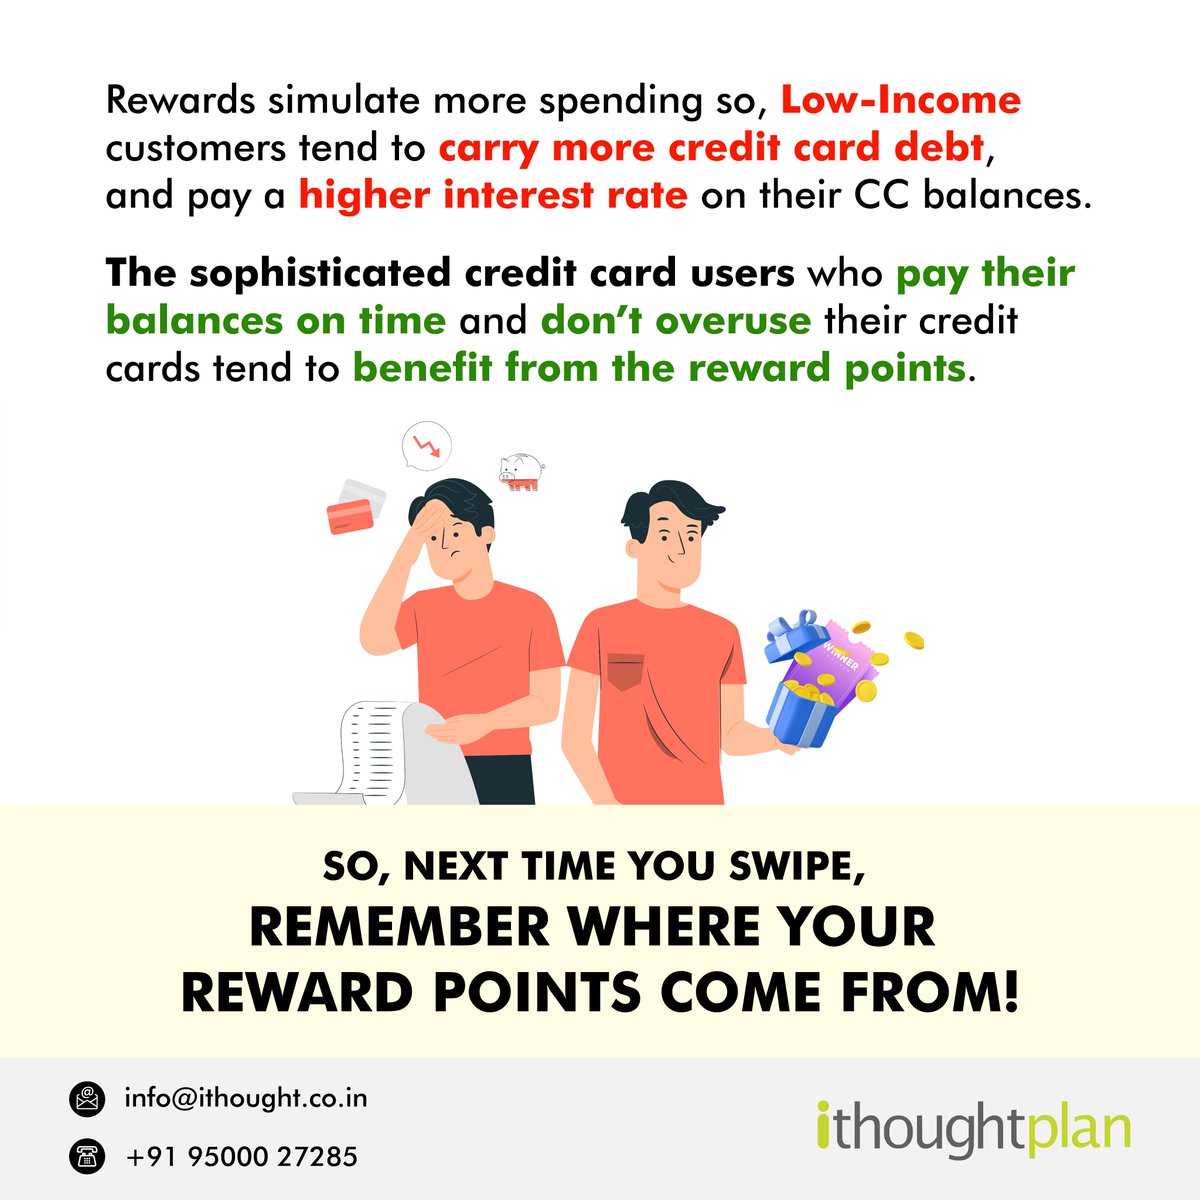 Where do your credit card reward points come from?

#creditcard #banks #rewardpoints #cibilscore